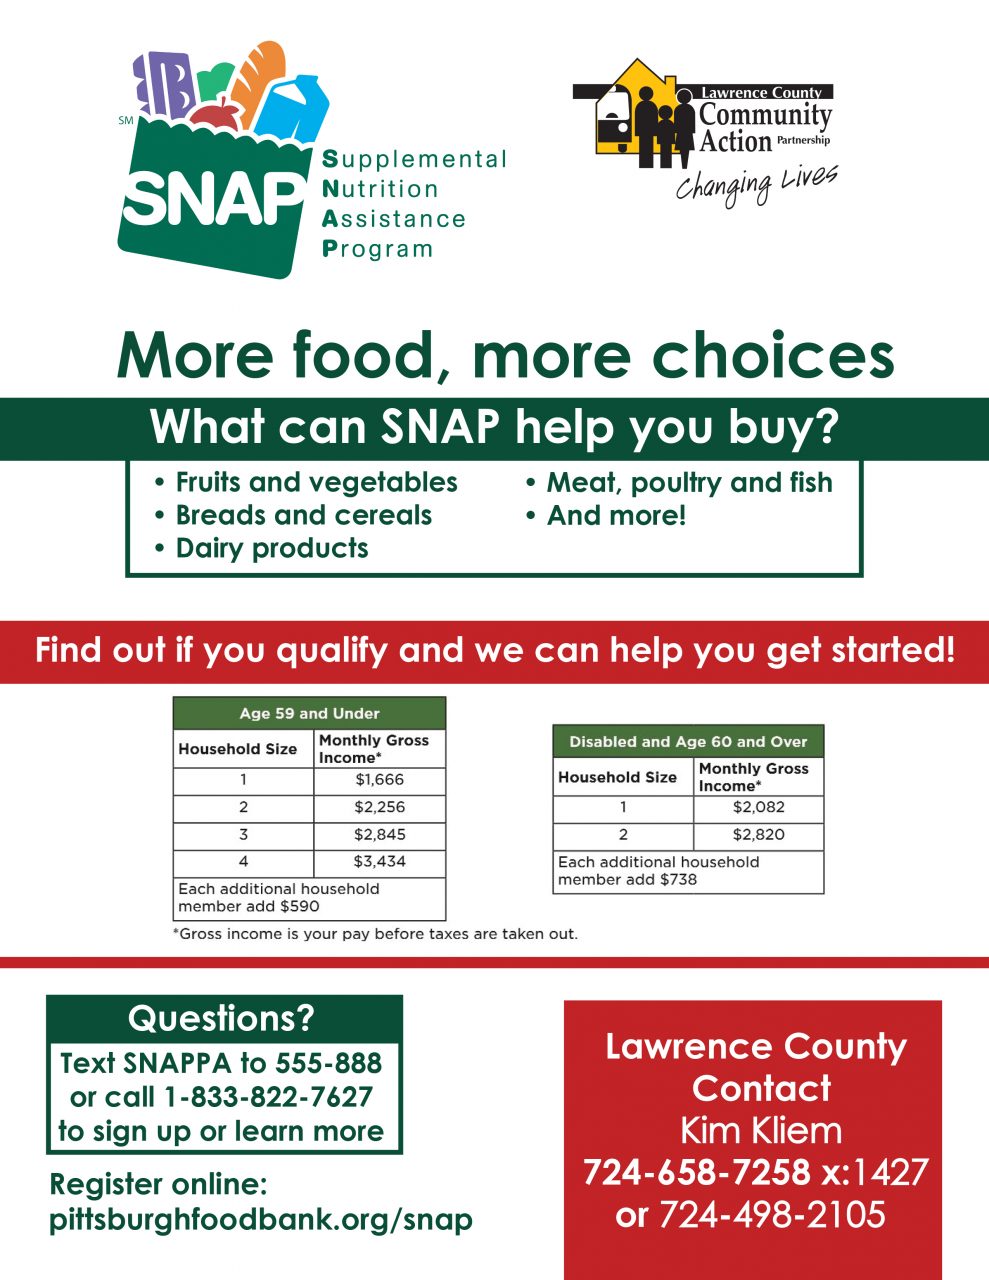 Supplemental Nutrition Assistance Program (SNAP) Lawrence County